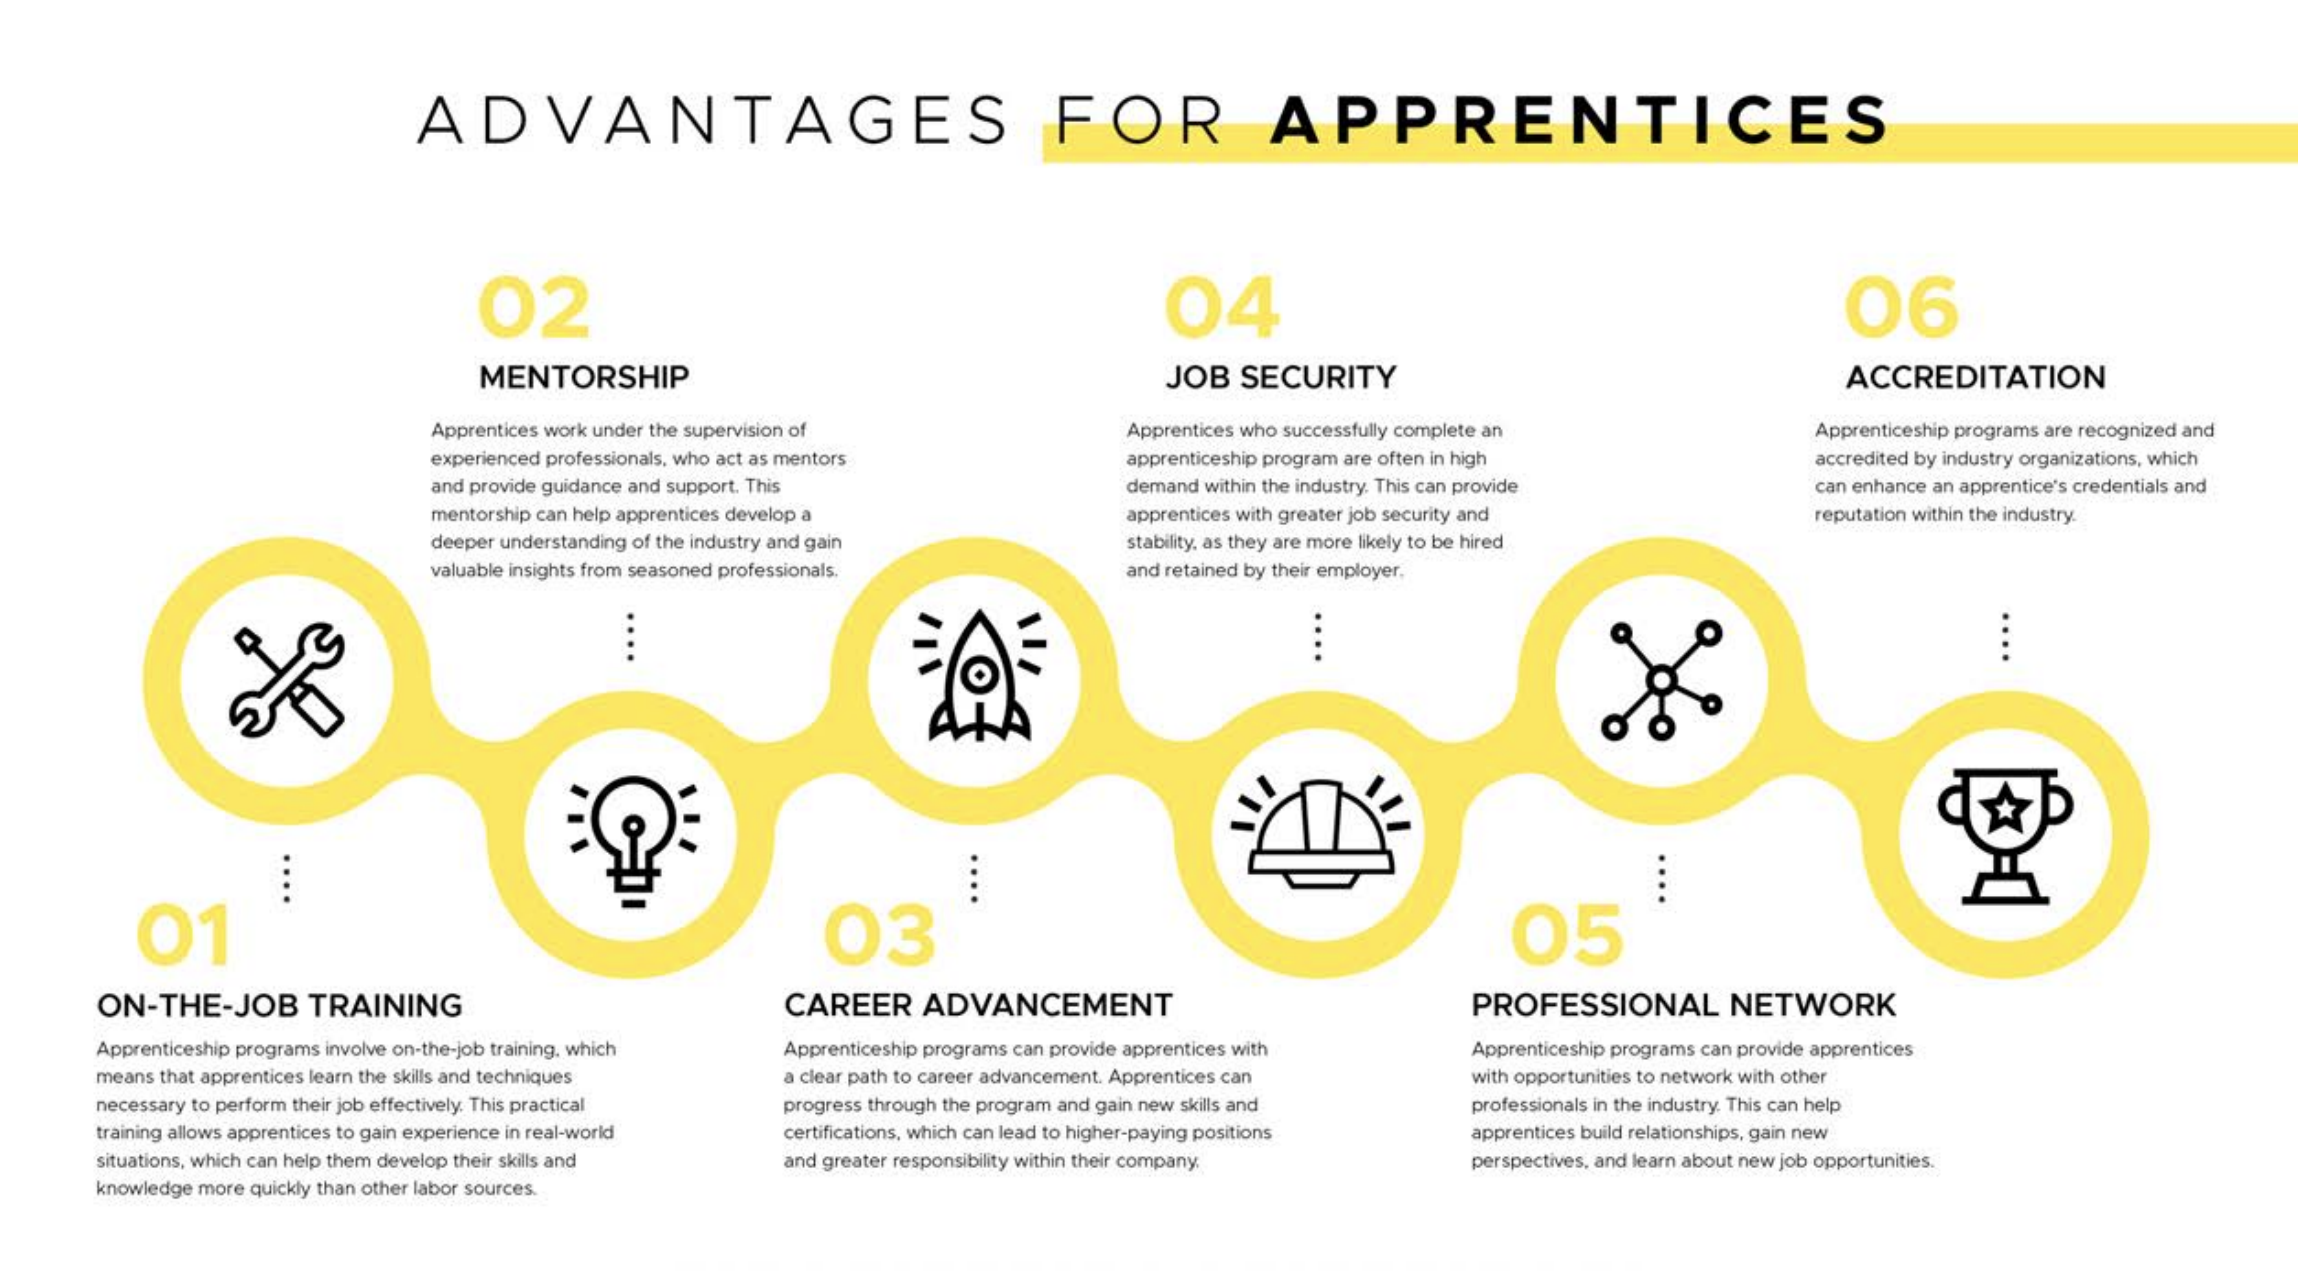 Detailed infographic on benefits apprentices receive by enrolling in HCATF programs.